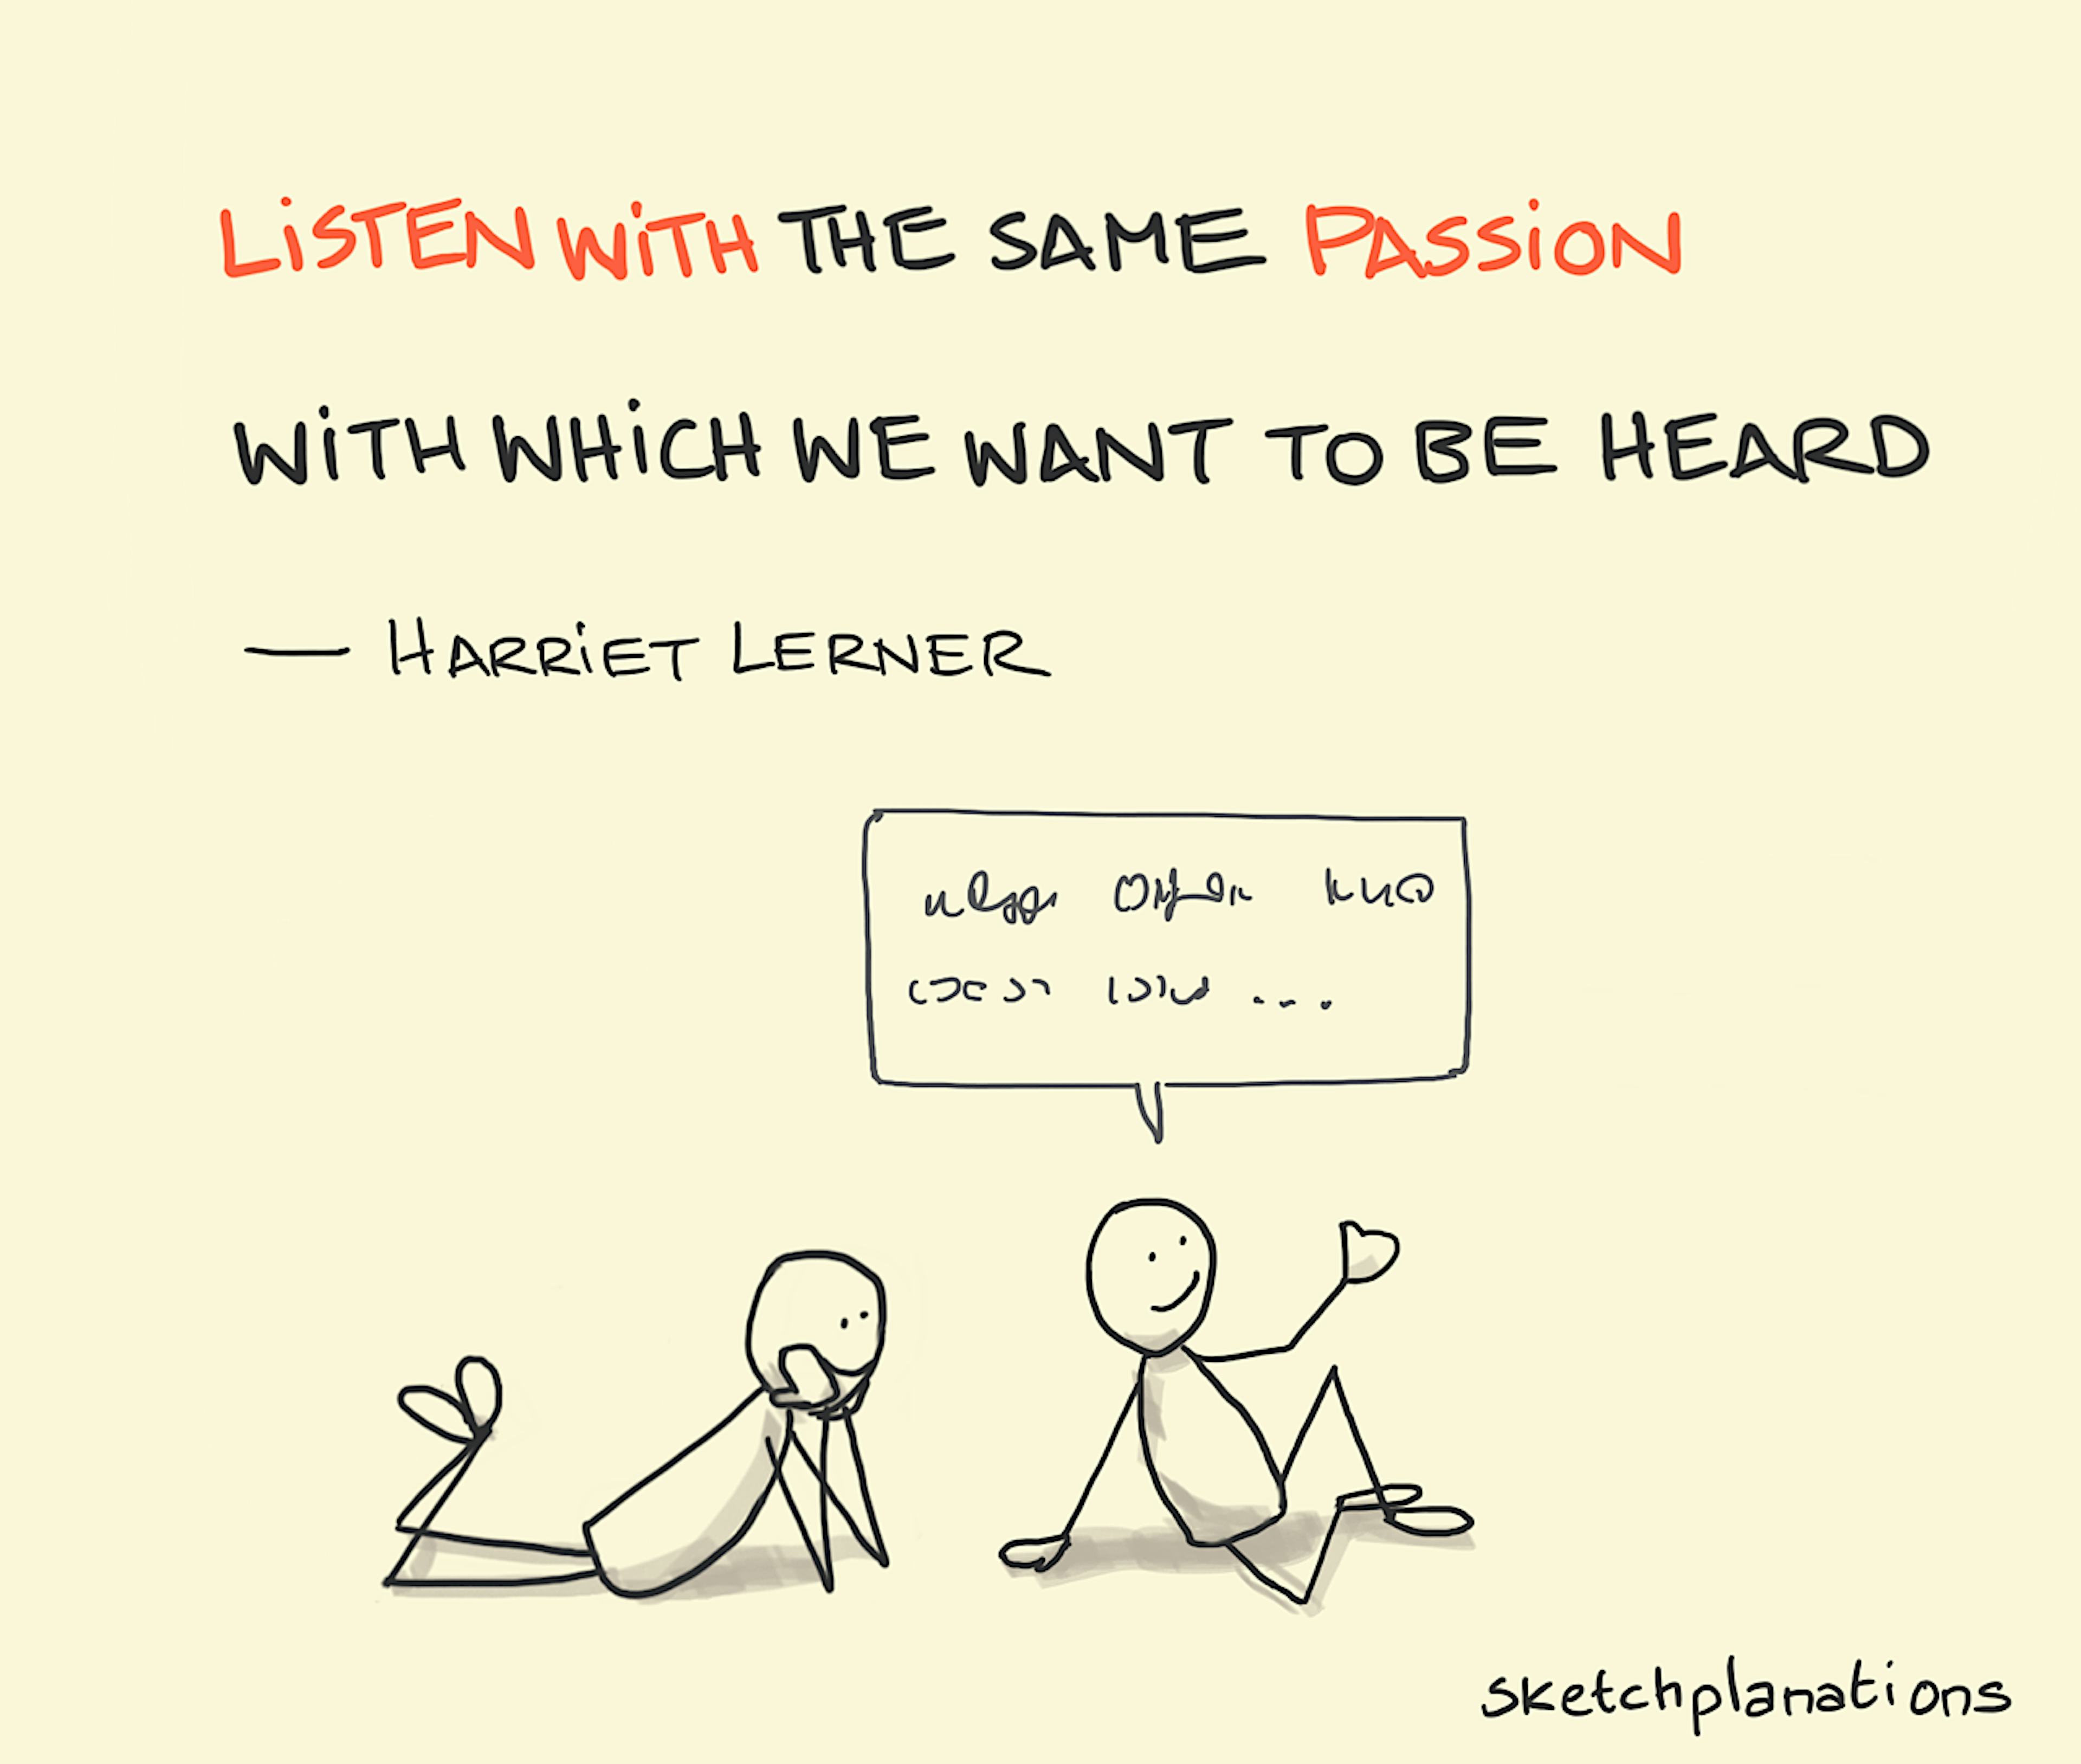 Listen with Passion quote from Harriet Lerner illustration: as one individual talks, another listens intently following the mantra within this quote that we should "Listen with the same passion with which we want to be heard". 